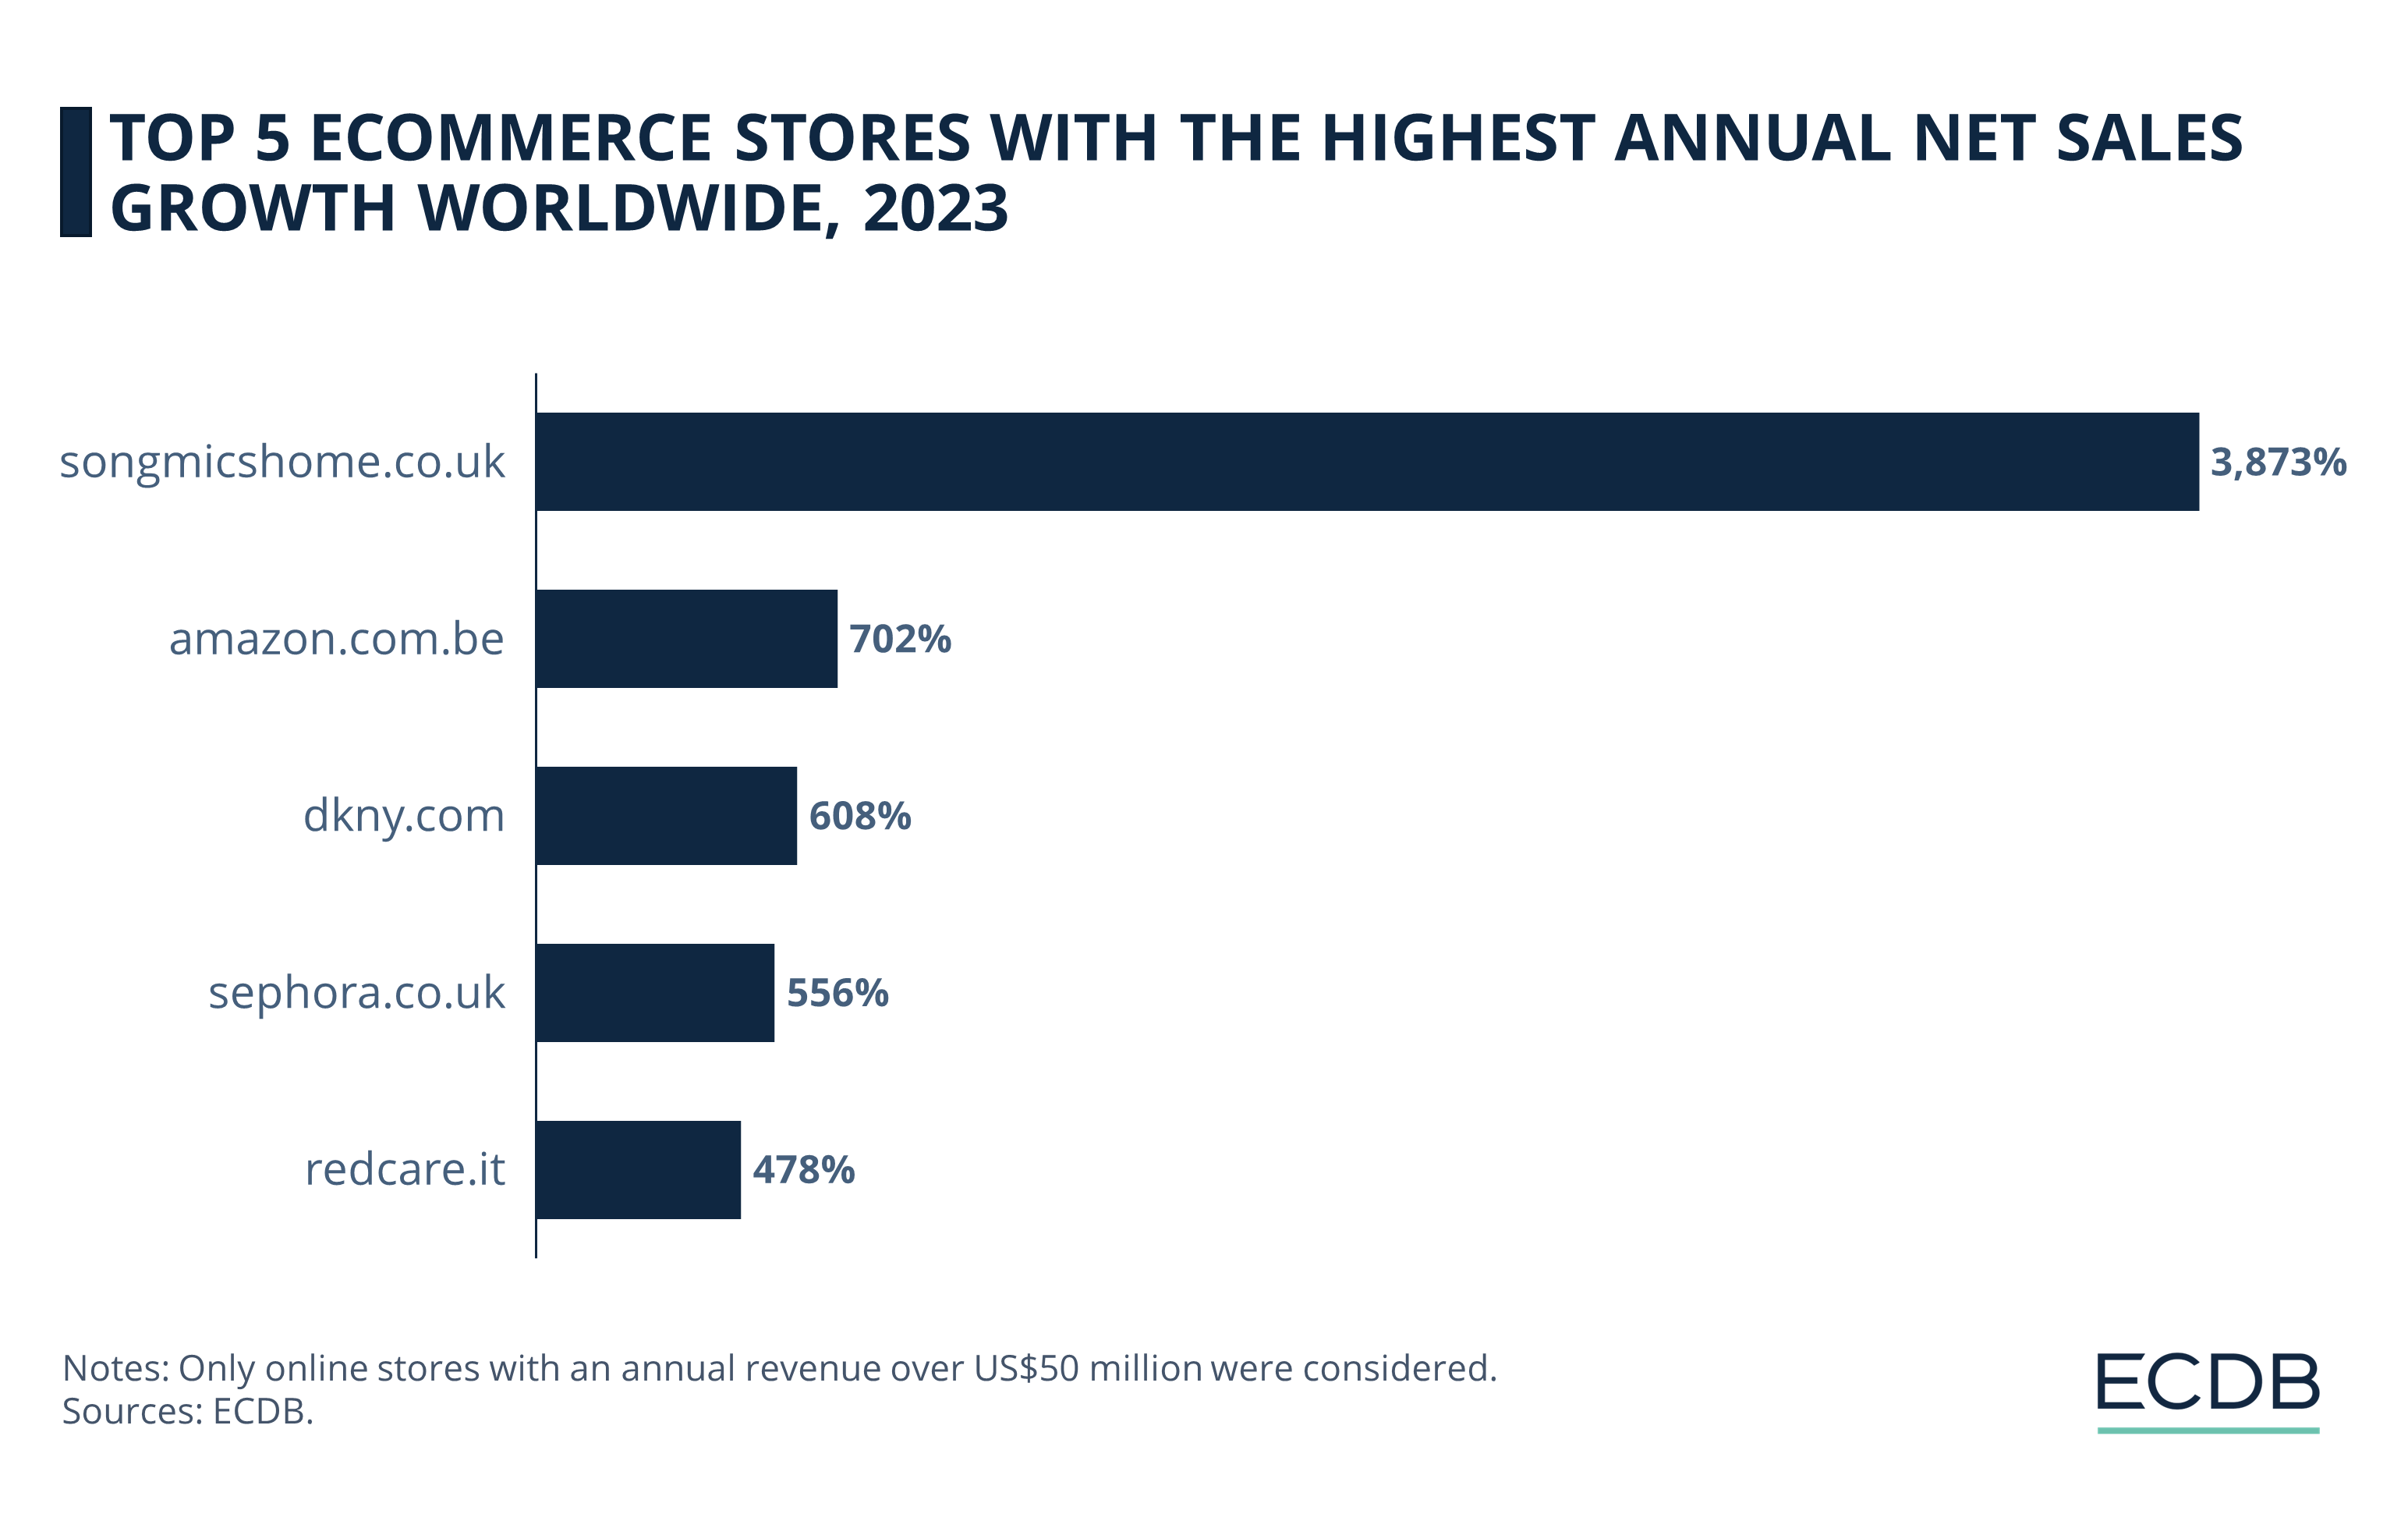 Top 5 eCommerce Stores With the Highest Annual Net Sales Growth Worldwide, 2023